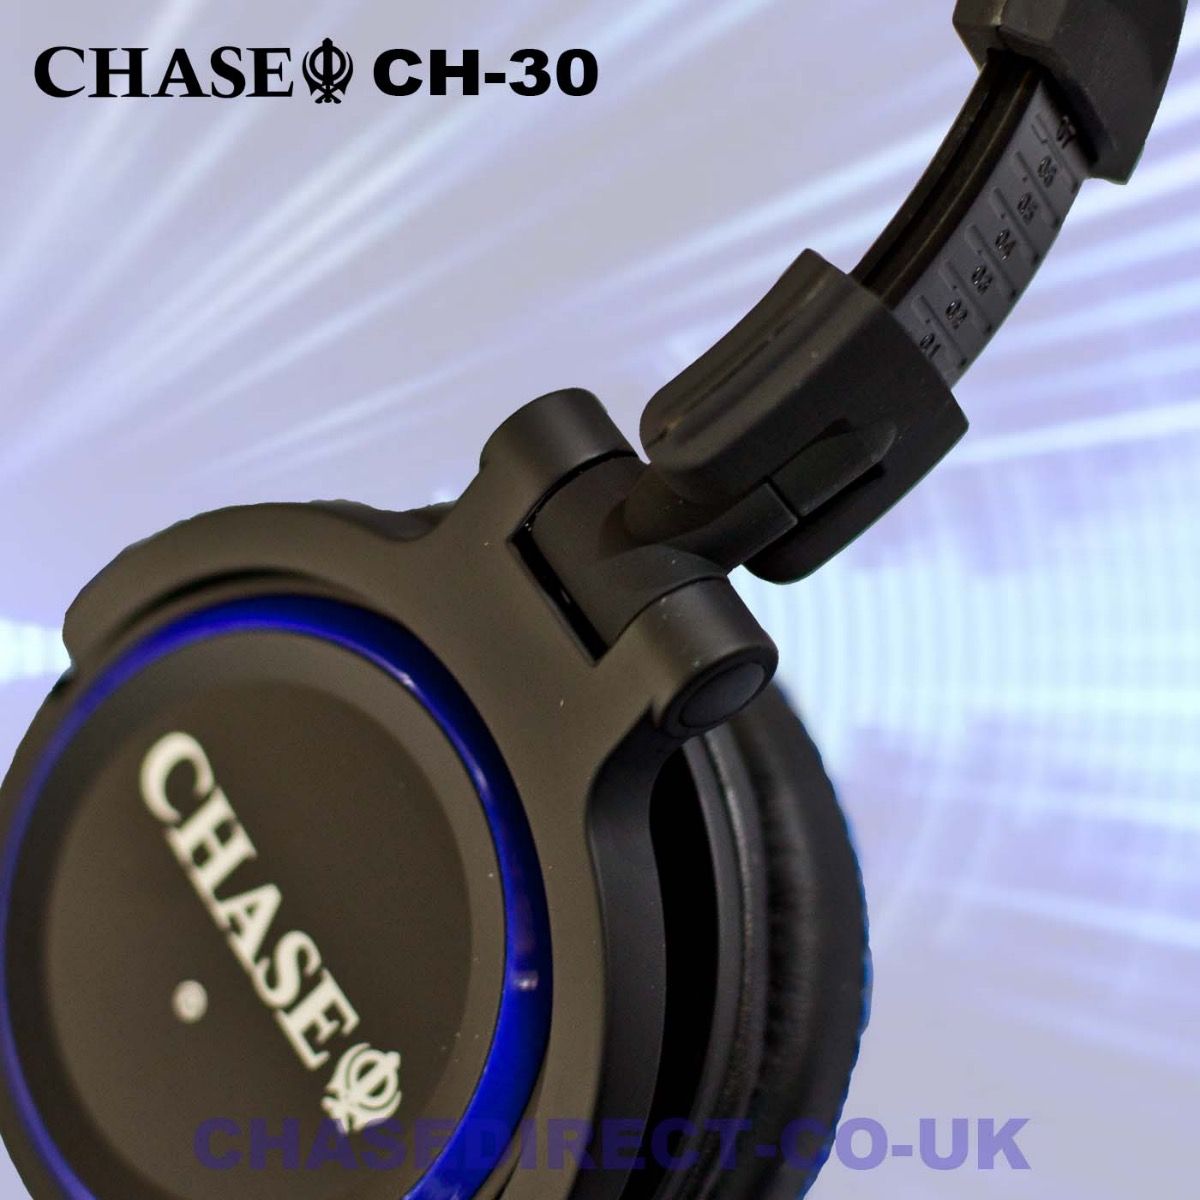 Chase CH-30 Stereo Headphones Noise Cancelling Studio Earphones